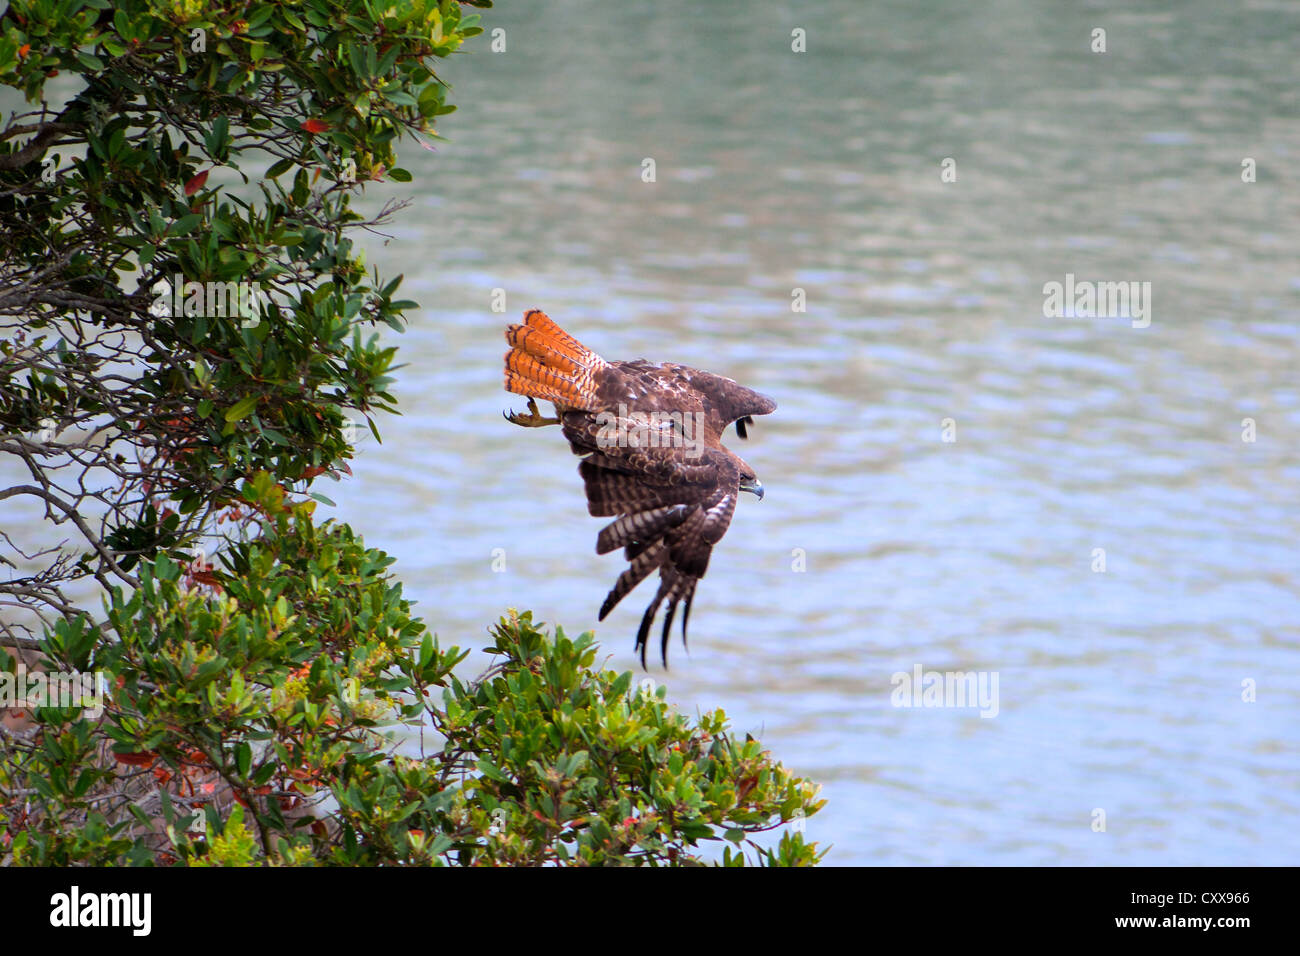 Profile of a red kite hawk leaving branch of tree near the ocean Stock Photo